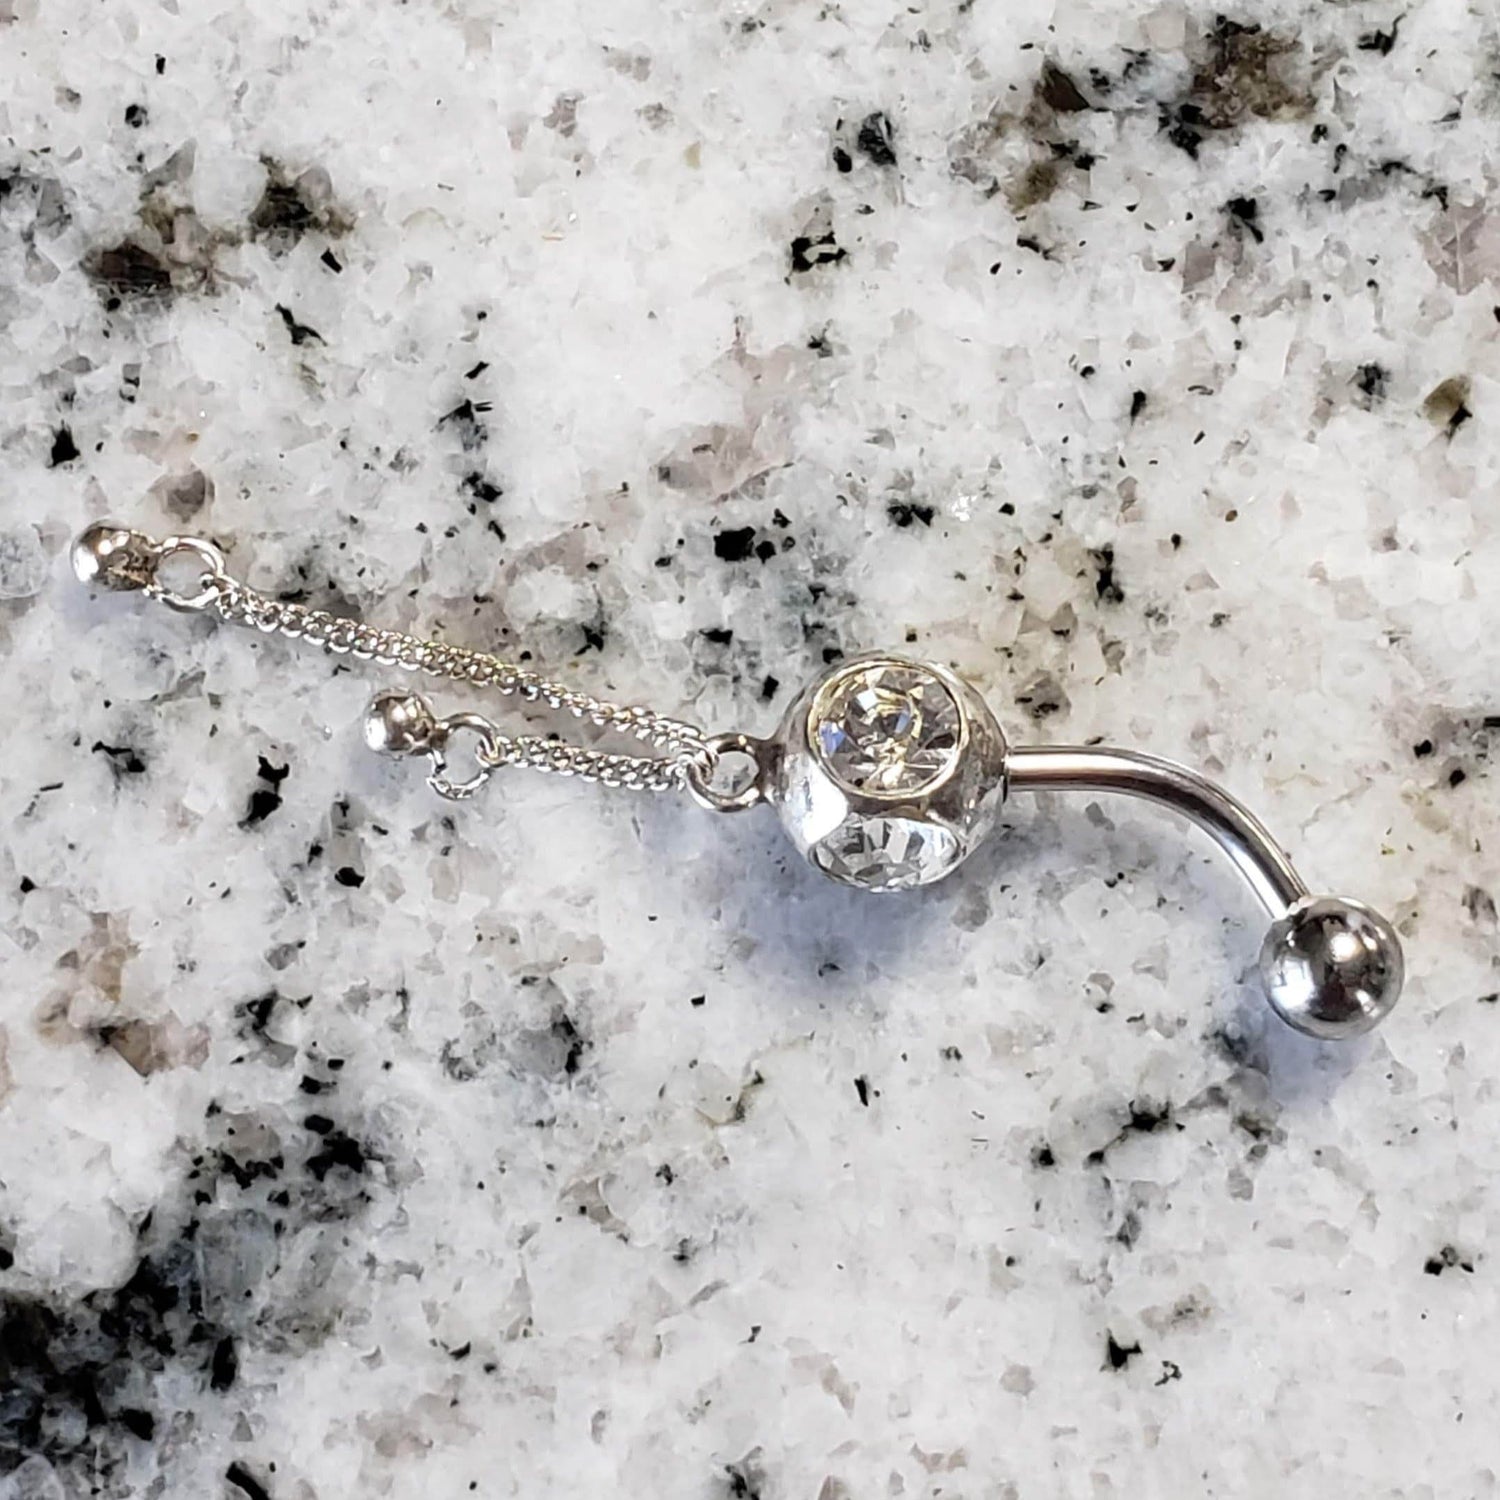 Dangle Belly Ring | Surgical Steel and 925 Silver | White Sapphire Crystal | Canagem.com